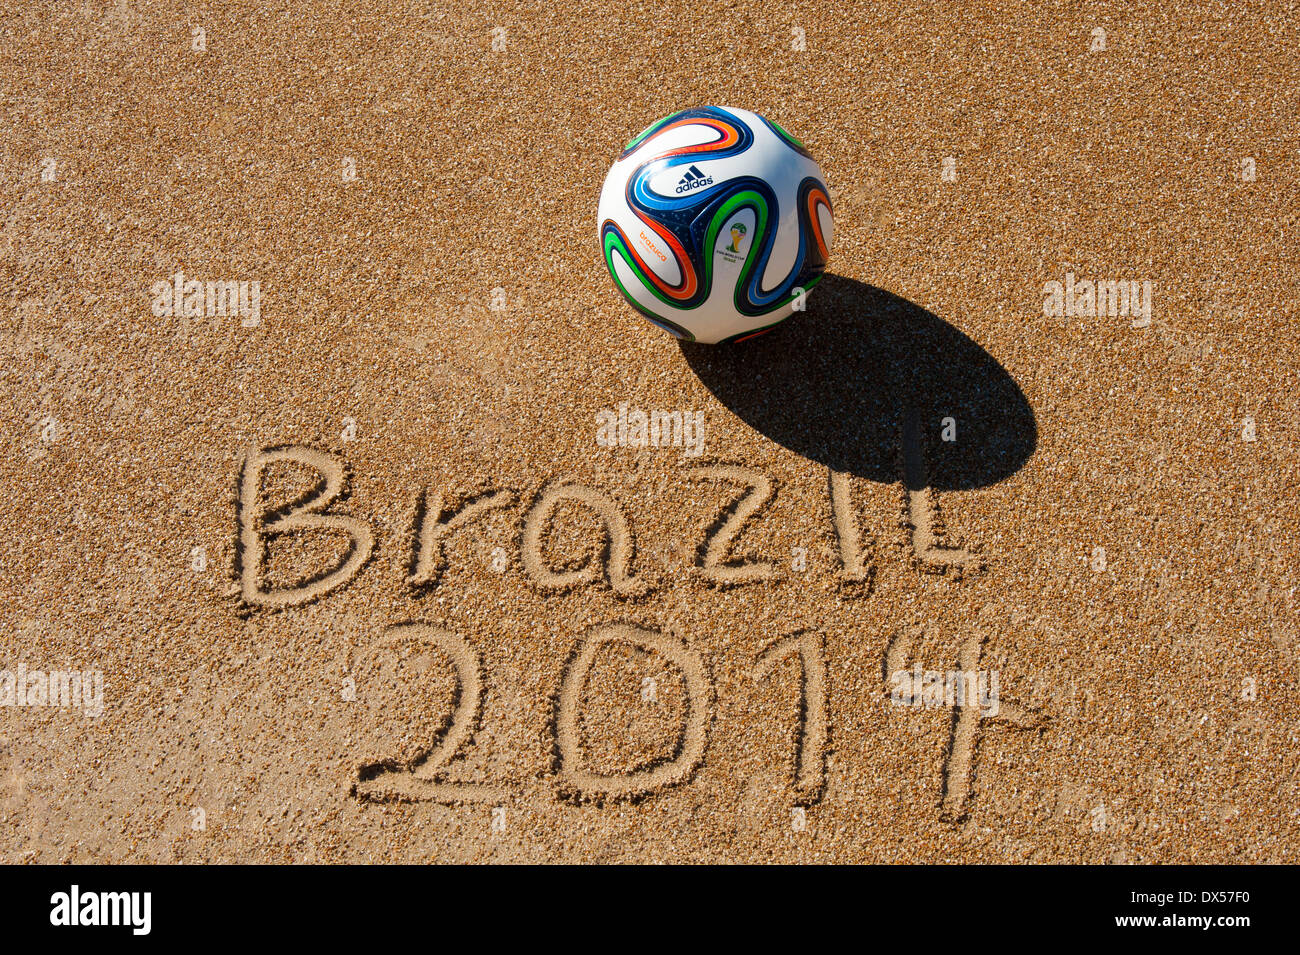 Brazuca, official matchball of FIFA World Cup Brazil 2014 Stock Photo -  Alamy